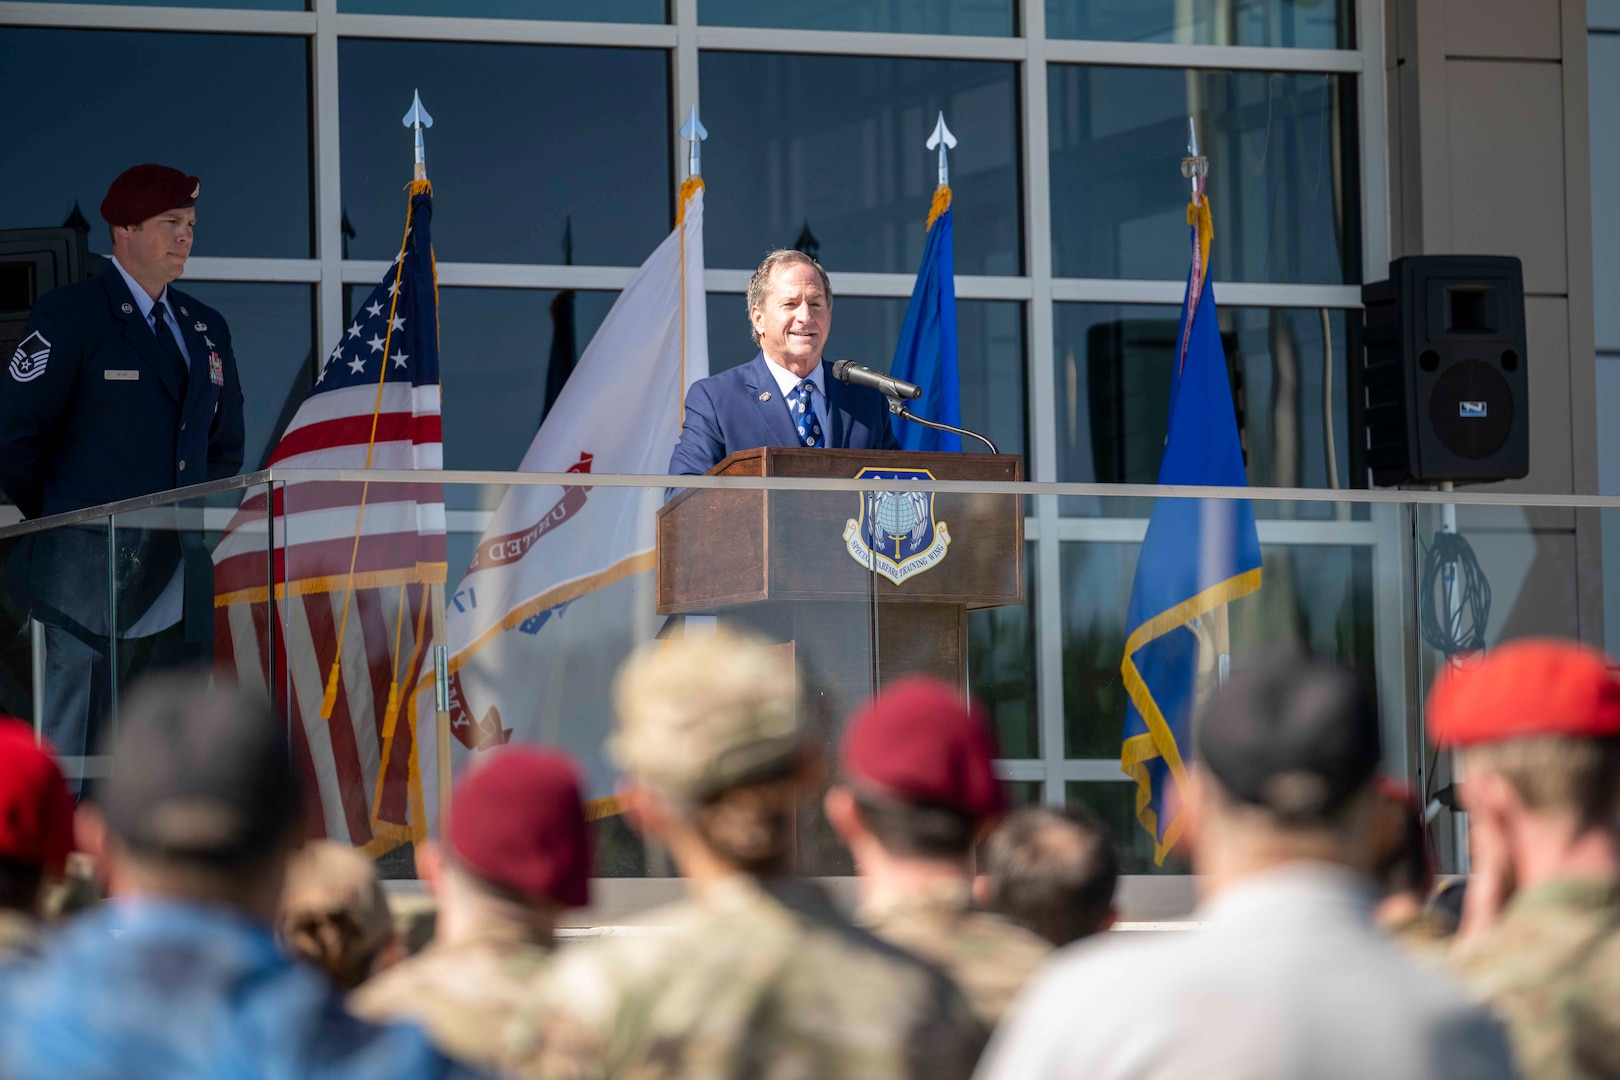 A man gives opening remarks at the grand opening of the Maltz Special Warfare Aquatic Training Center.